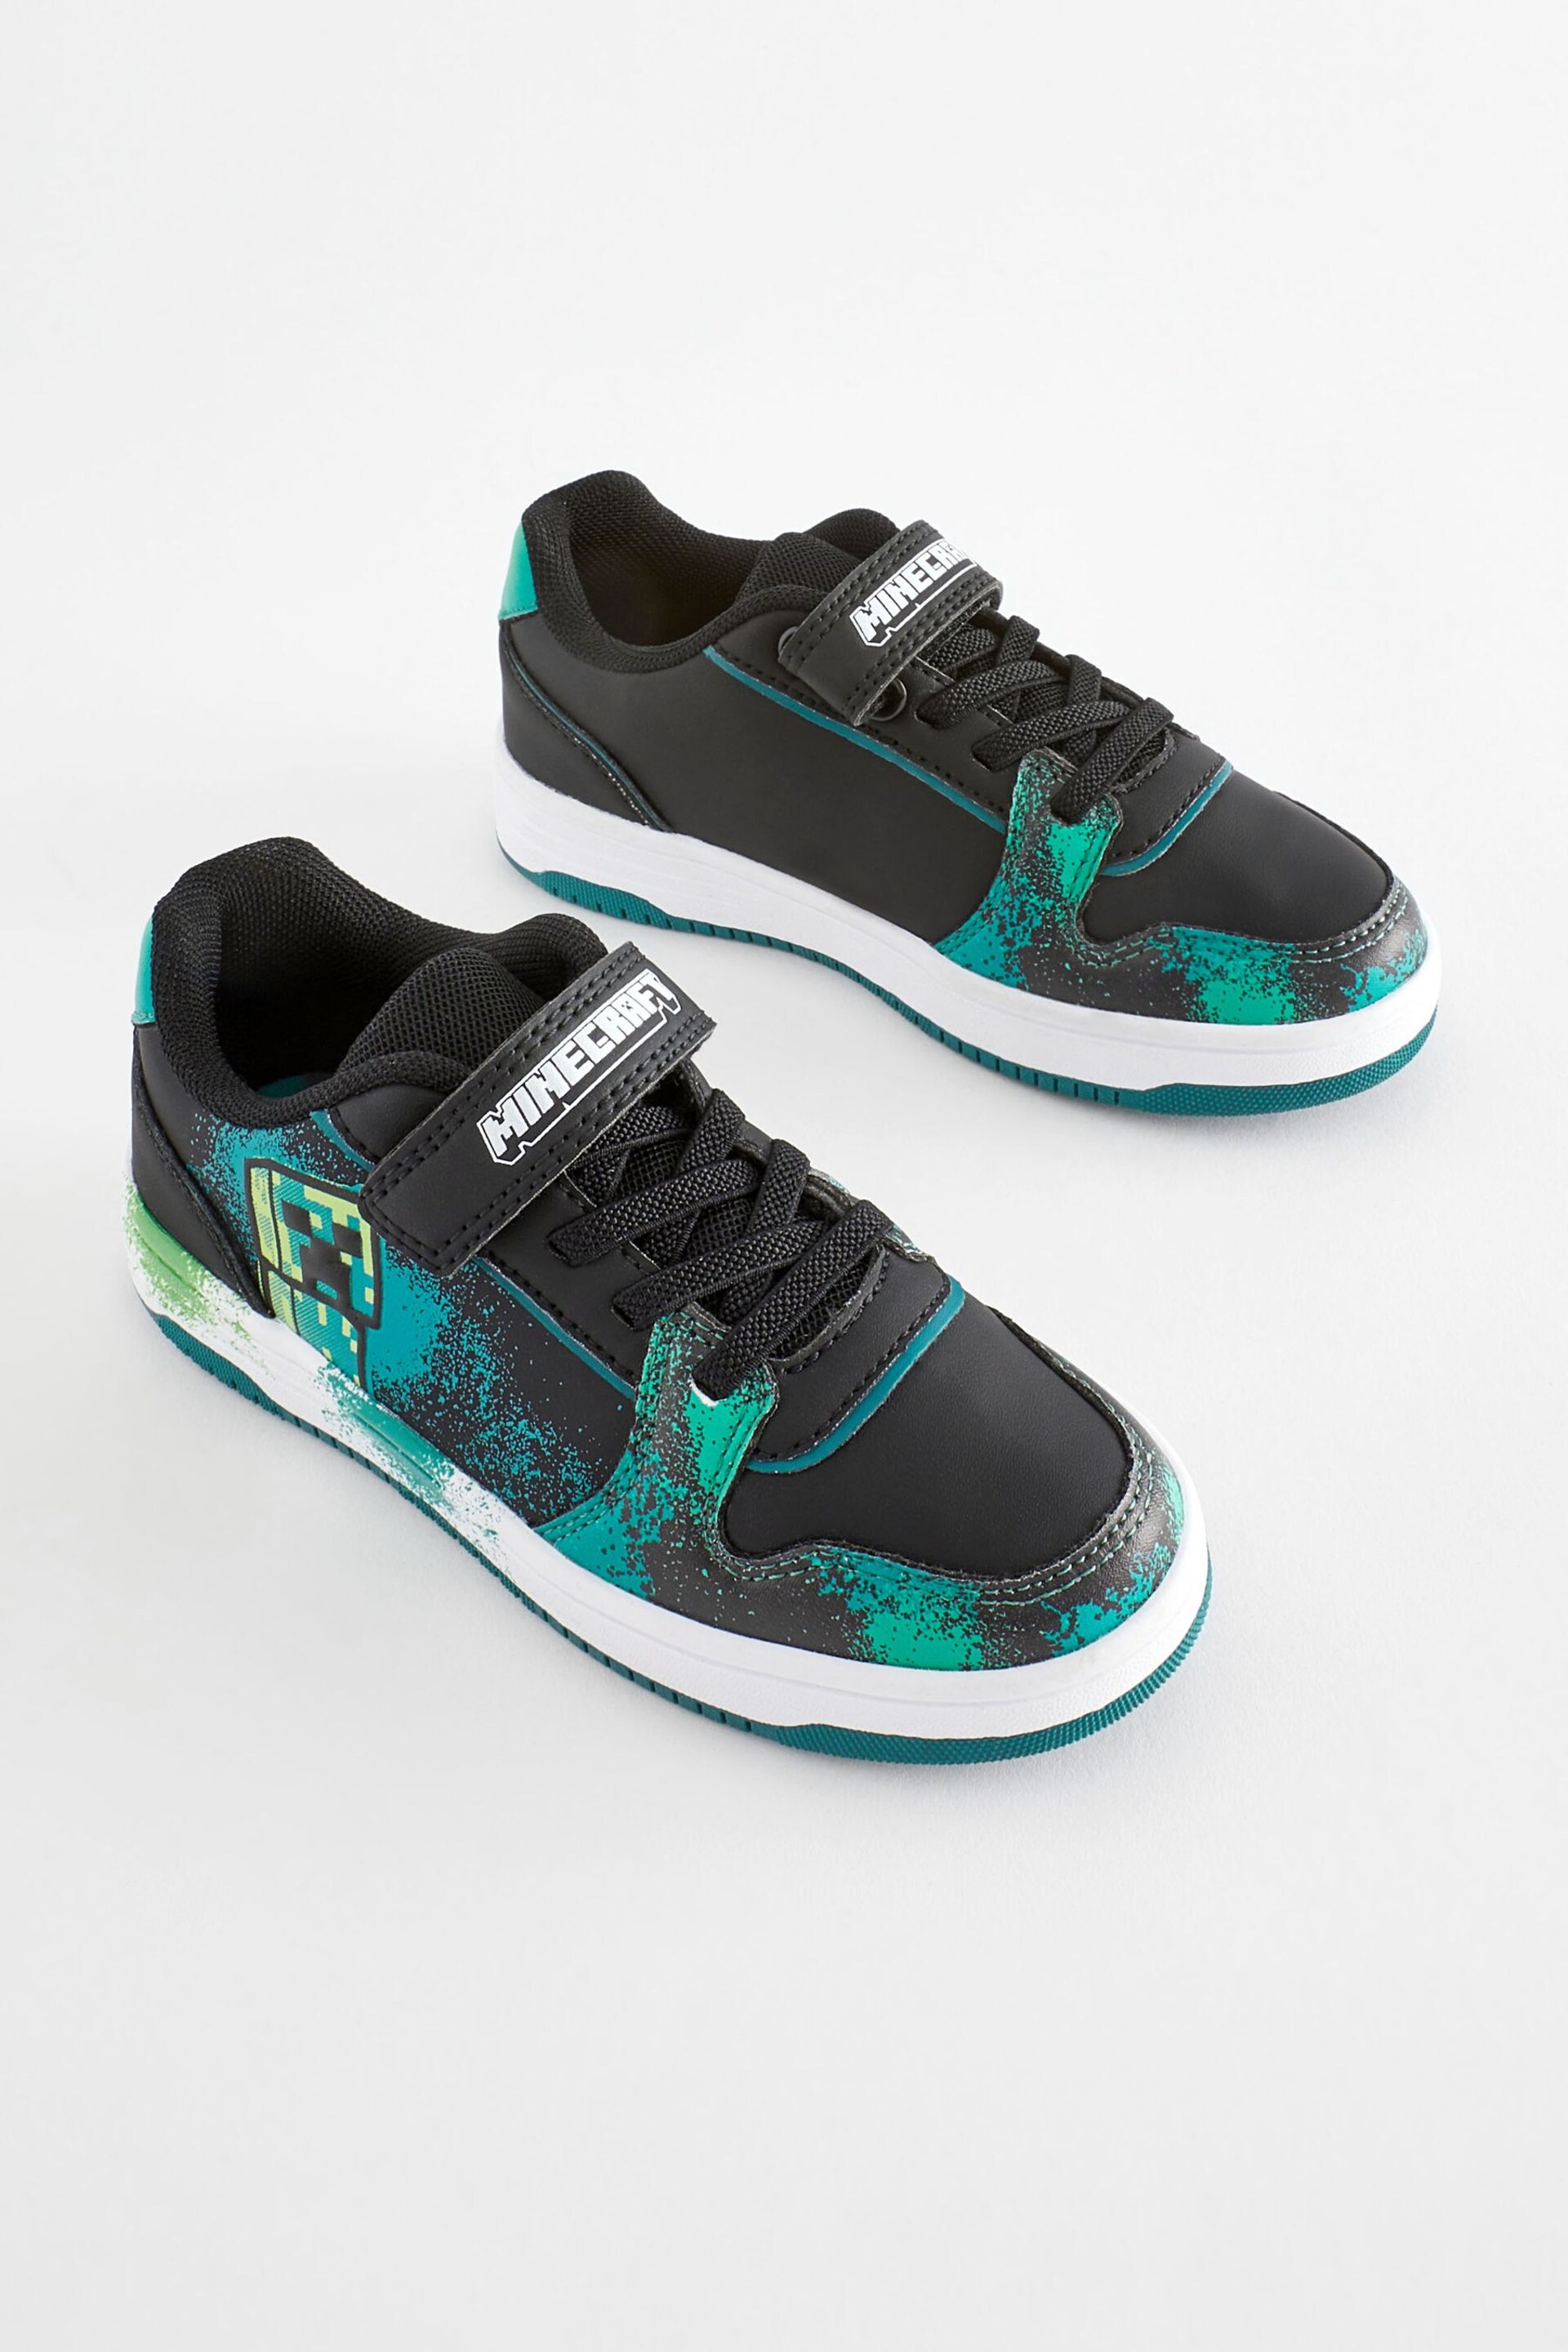 Black/Green Minecraft One Strap Elastic Lace Trainers - Image 1 of 6